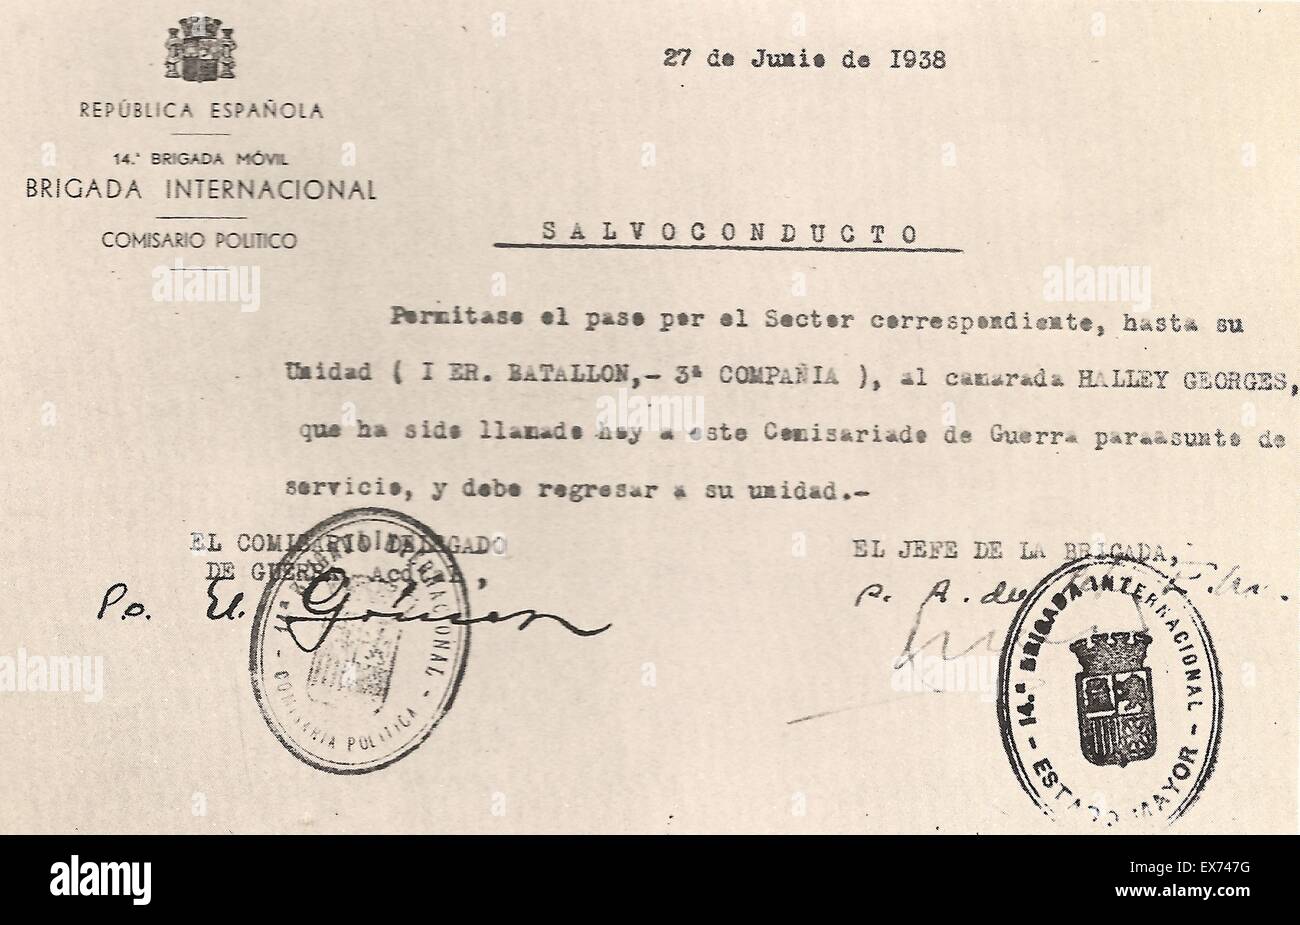 safe Conduct pass for International Brigade volunteer, George henry Halley, during the Spanish civil war Stock Photo